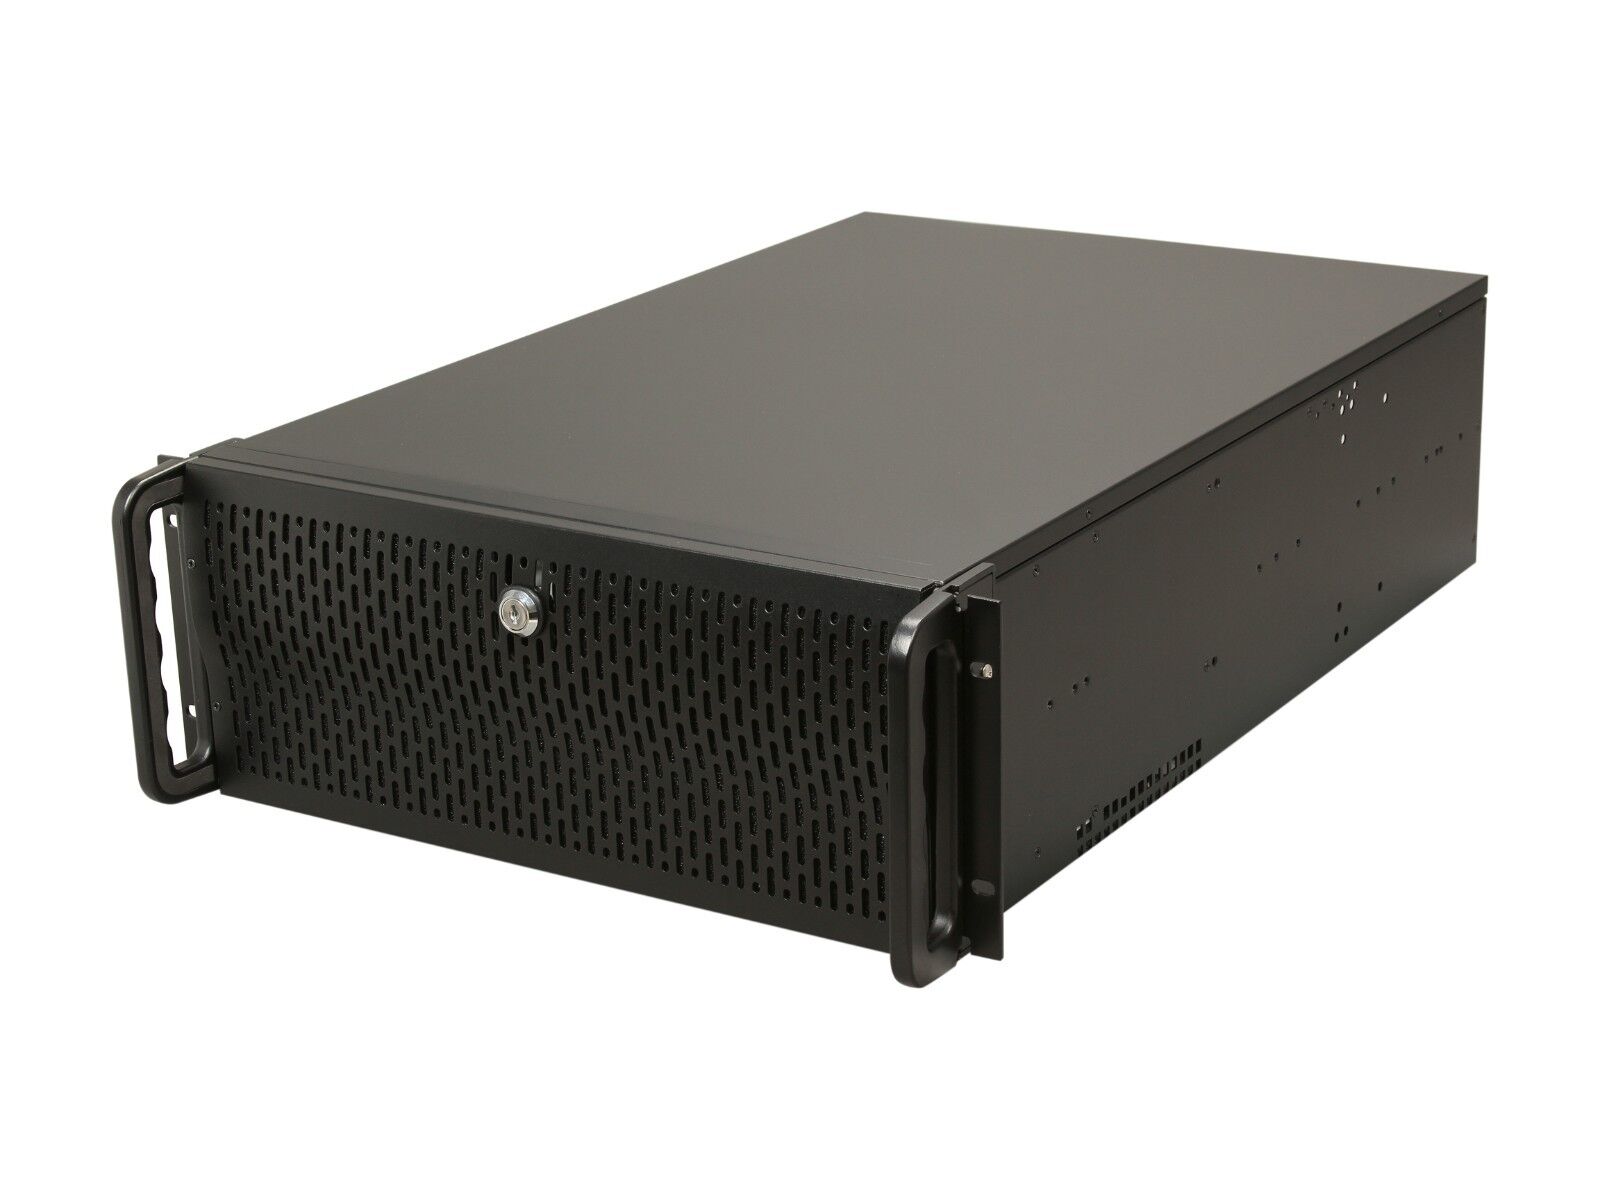 Rosewill 4U Rackmount Server Chassis with 15 Internal Bays and 8 Fans RSV-L4500 Rosewill RSV-L4500